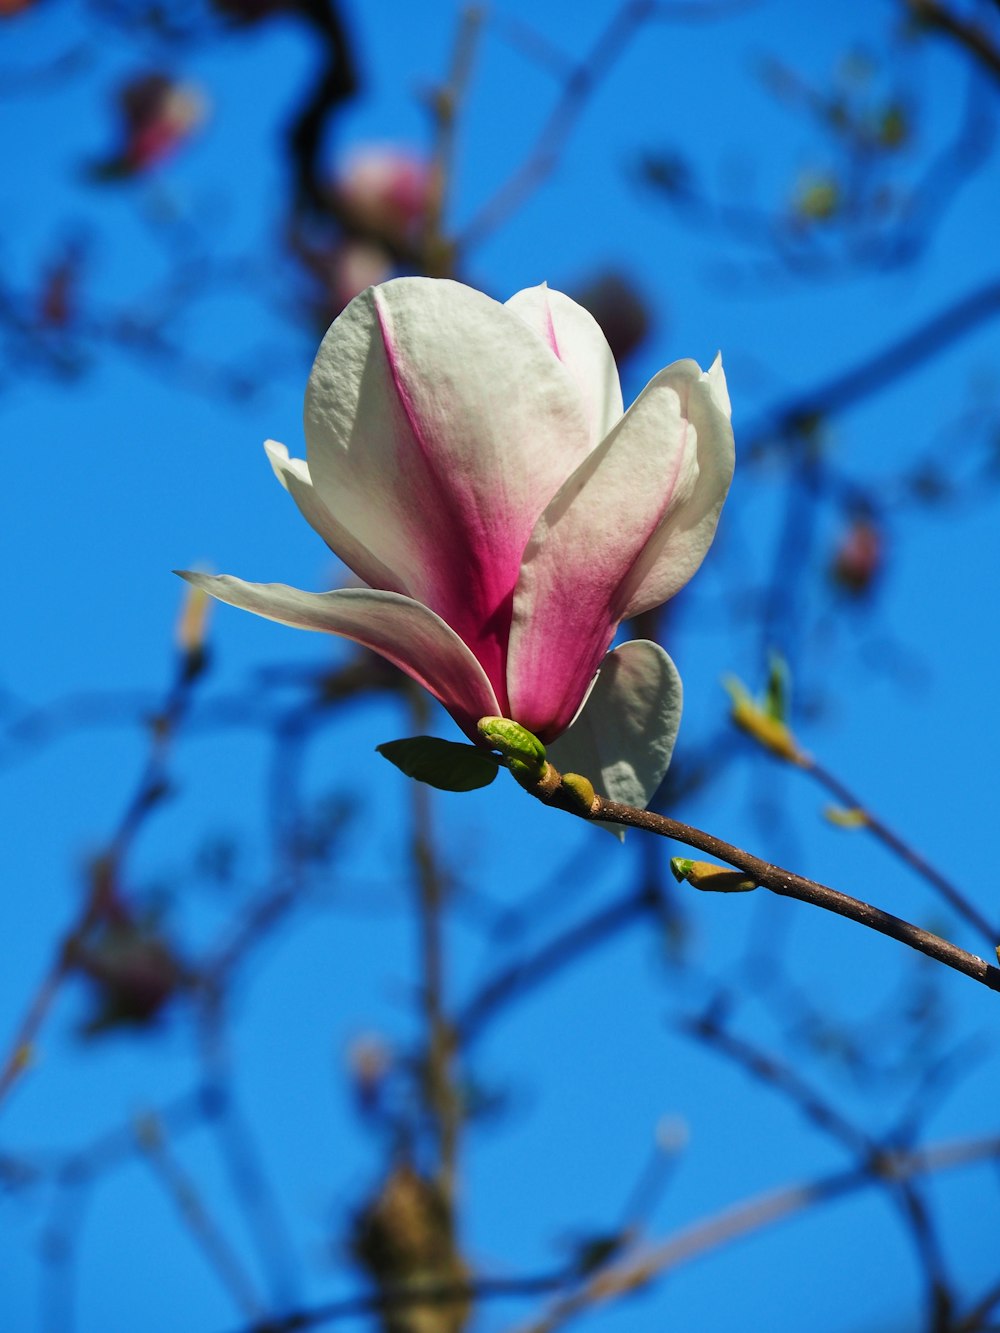 a white and pink flower on a tree branch